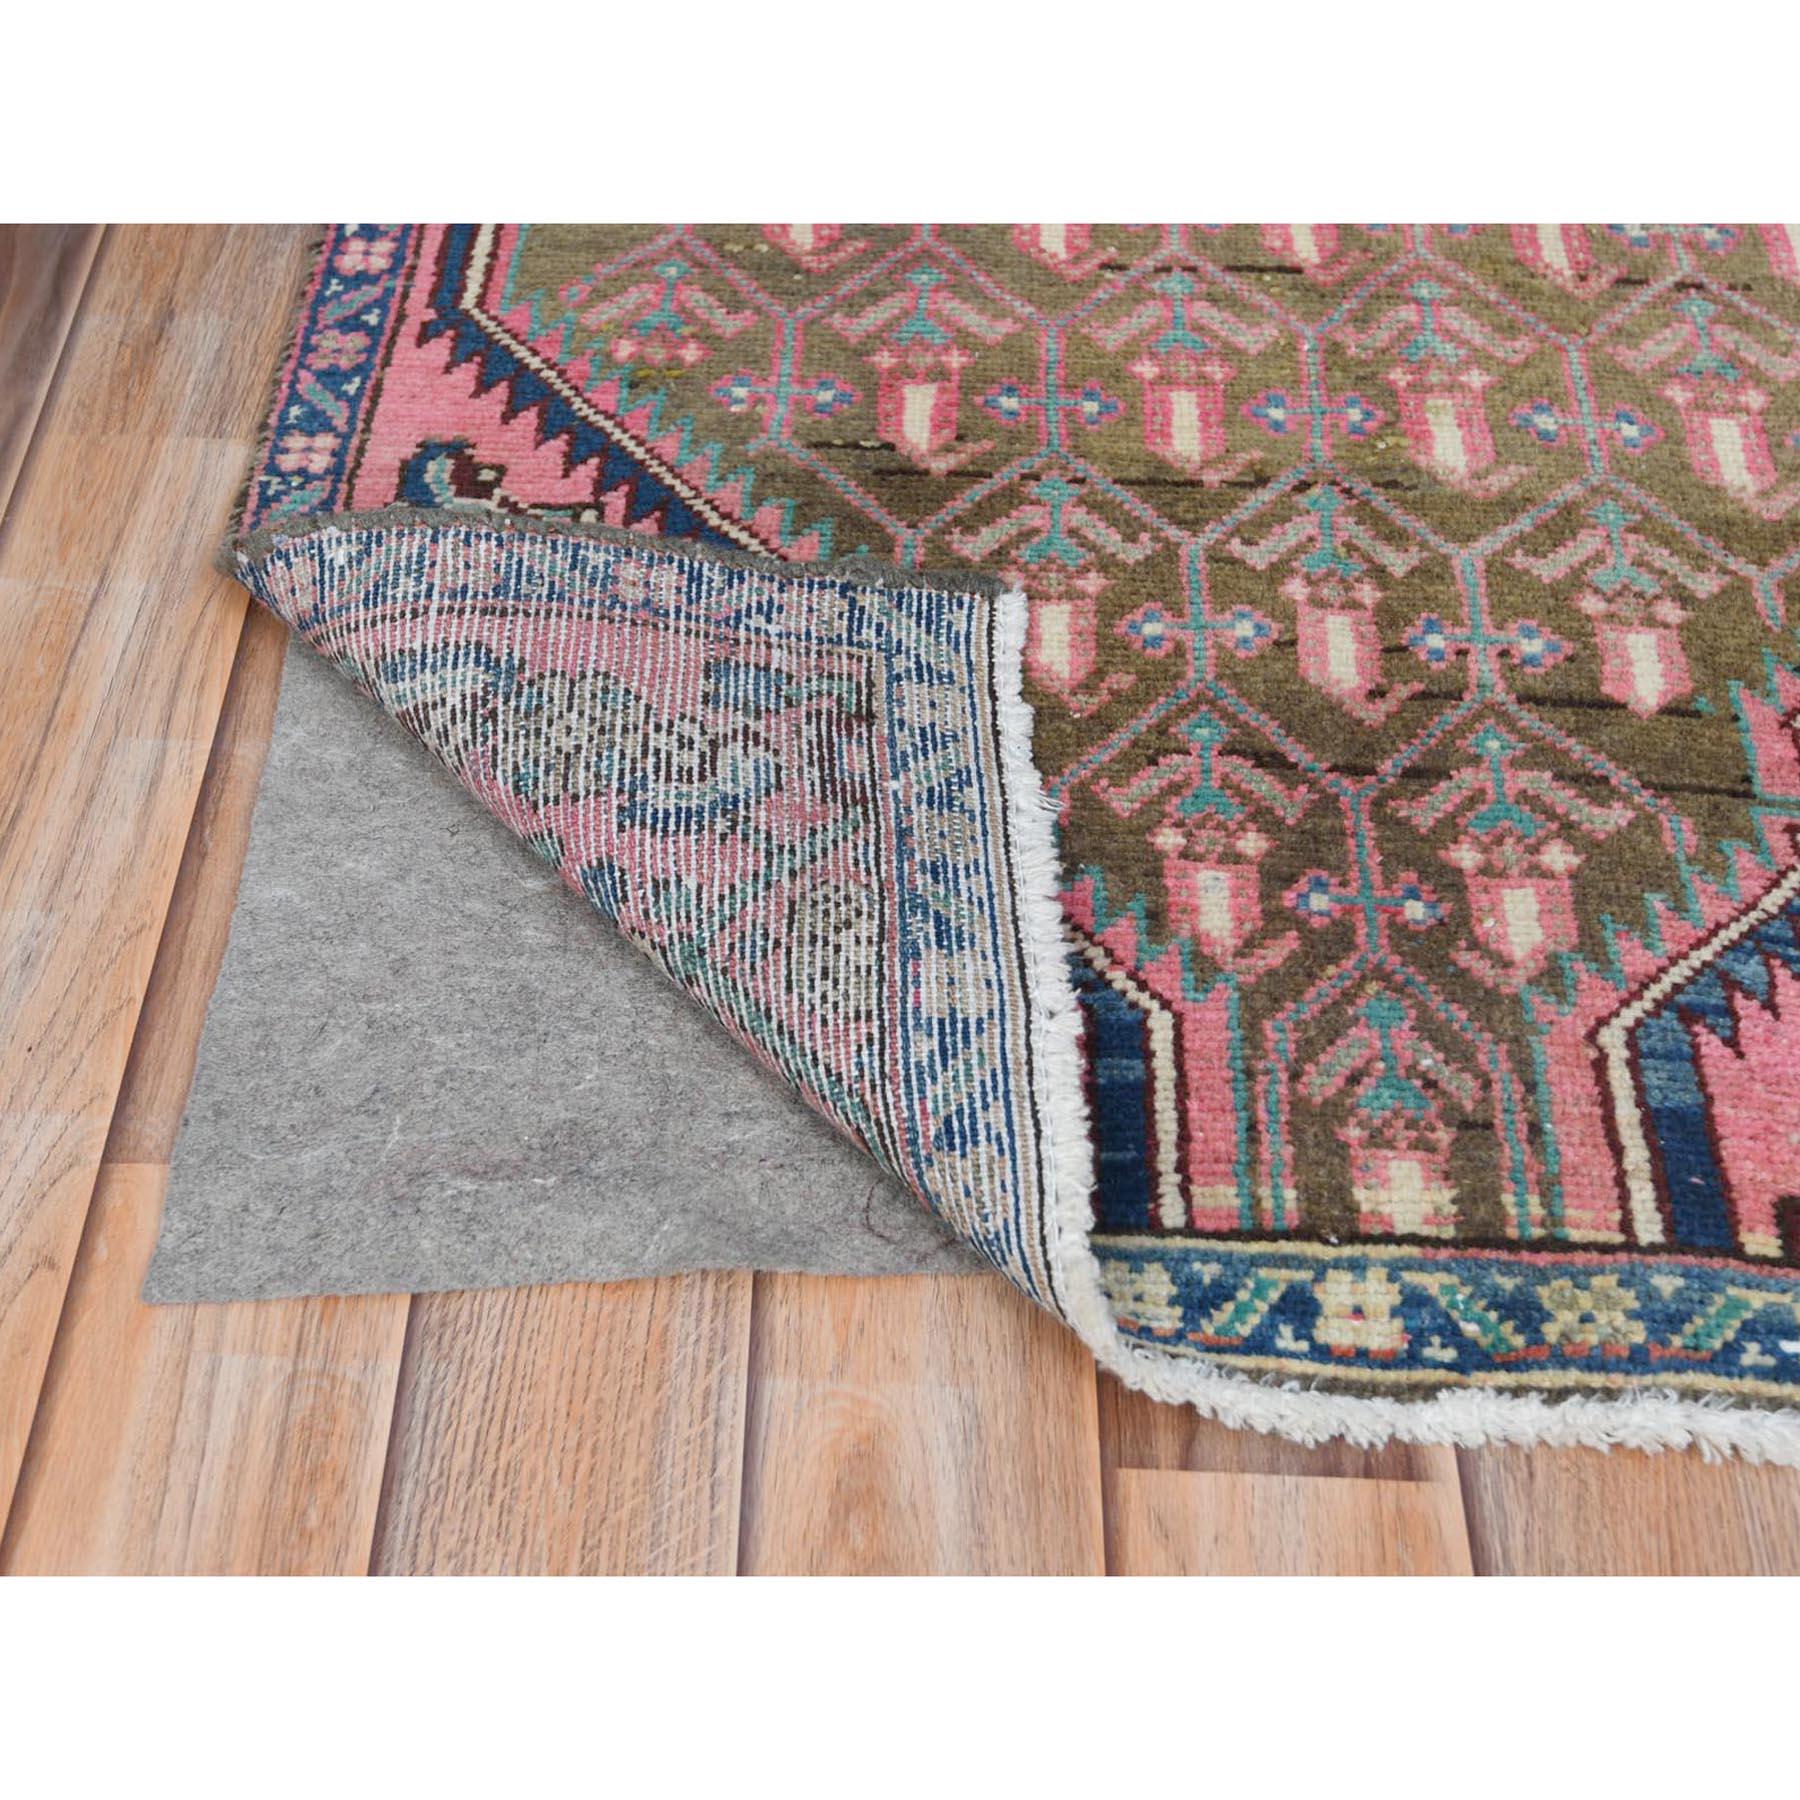 Medieval Apricot Color Vintage Persian Hamadan Worn Wool Distressed Look Hand Knotted Rug For Sale